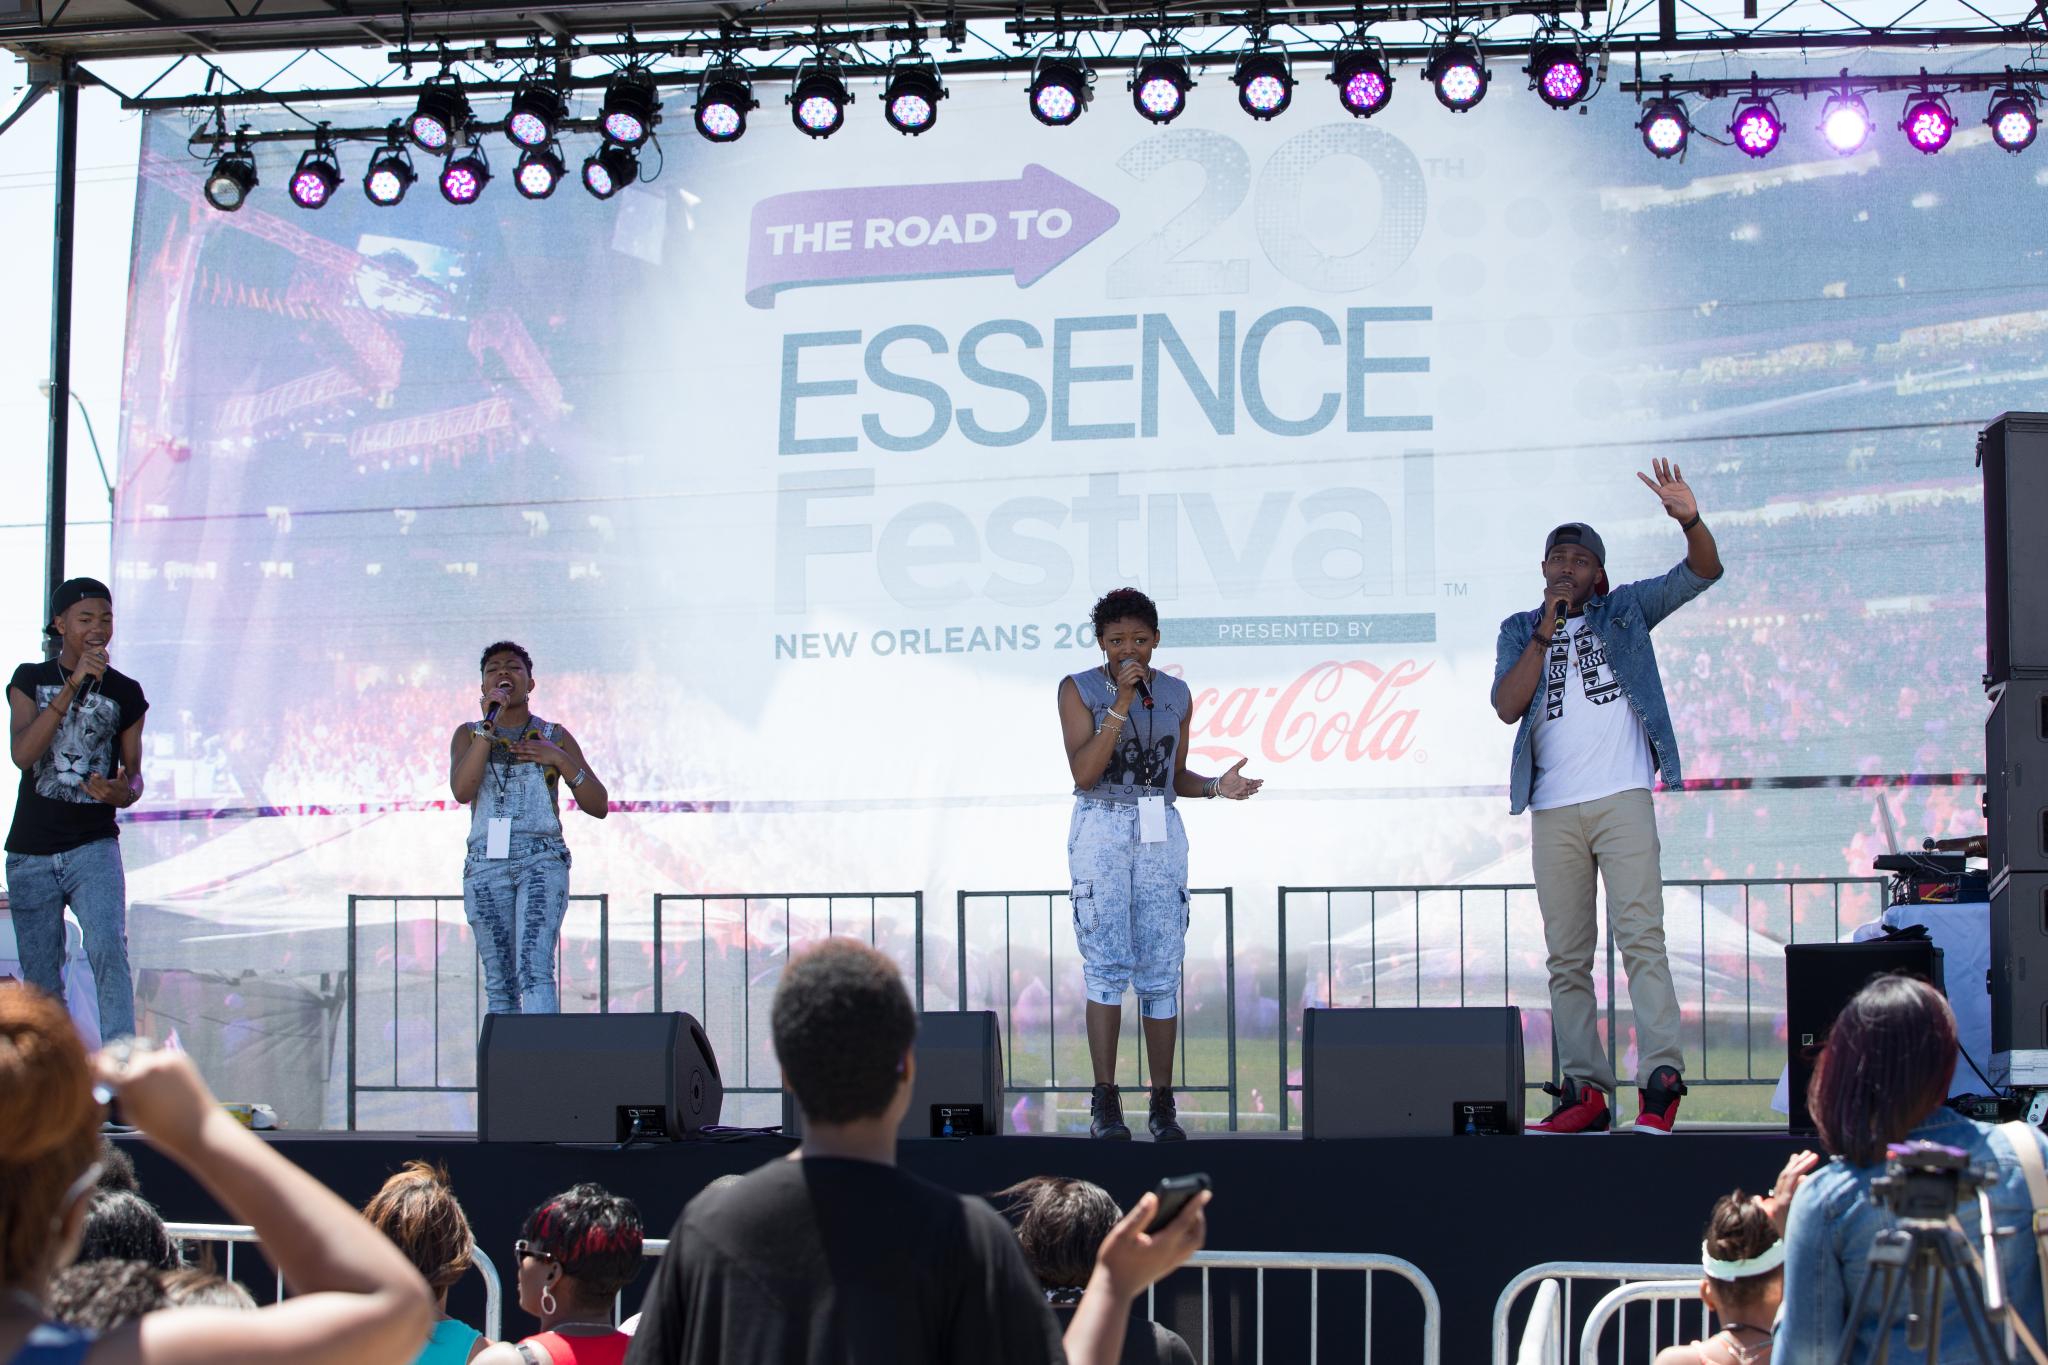 Check Out Some Pictures from The Road To ESSENCE Festival: Dallas